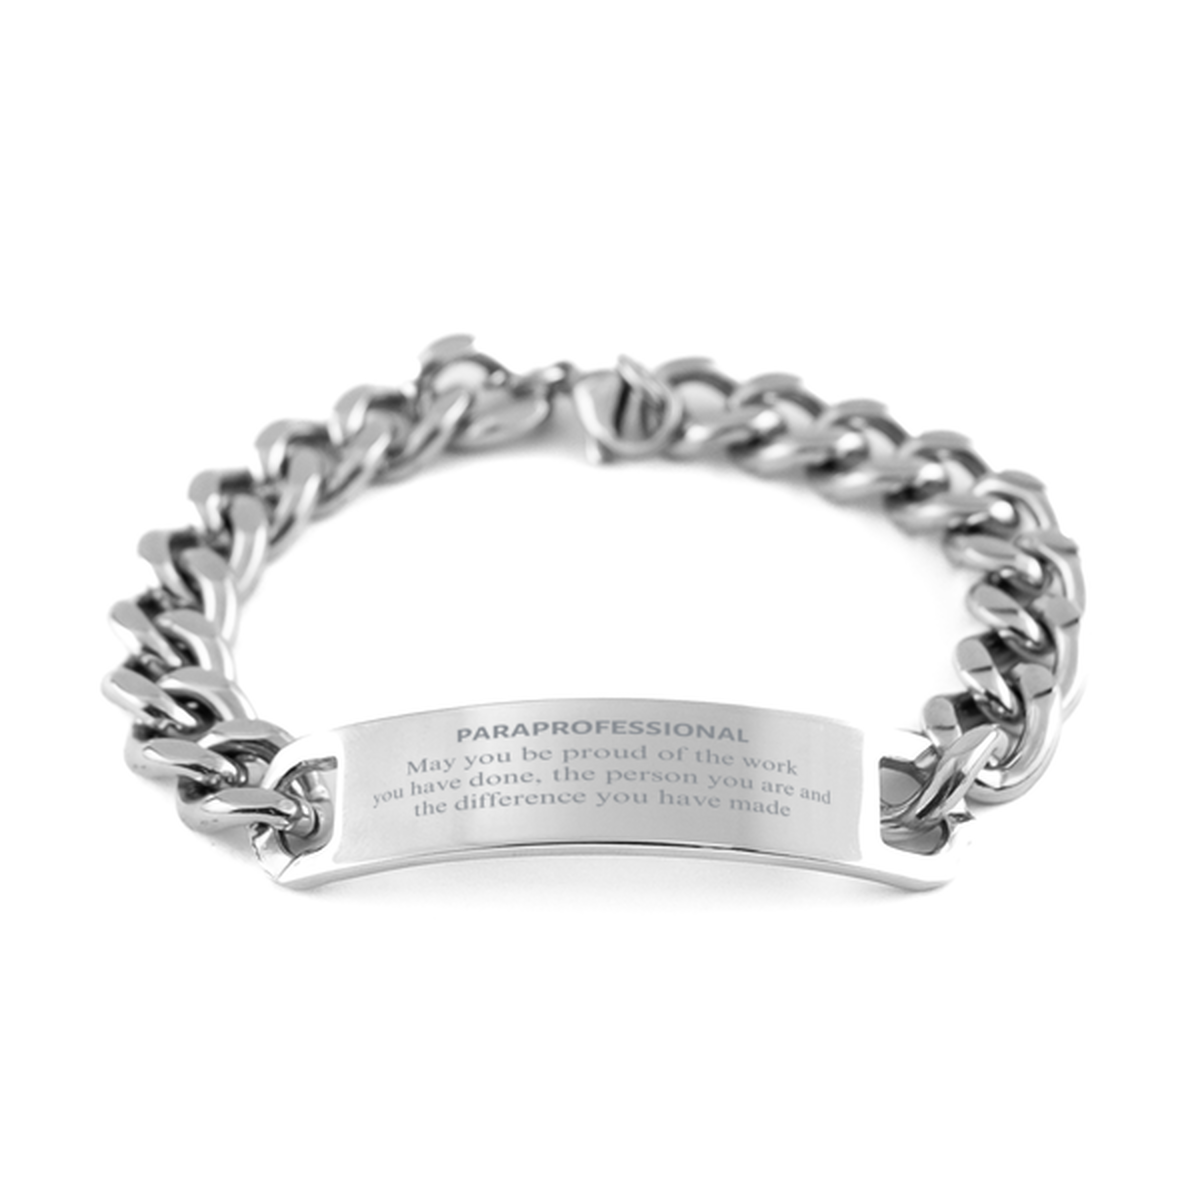 Paraprofessional May you be proud of the work you have done, Retirement Paraprofessional Cuban Chain Stainless Steel Bracelet for Colleague Appreciation Gifts Amazing for Paraprofessional